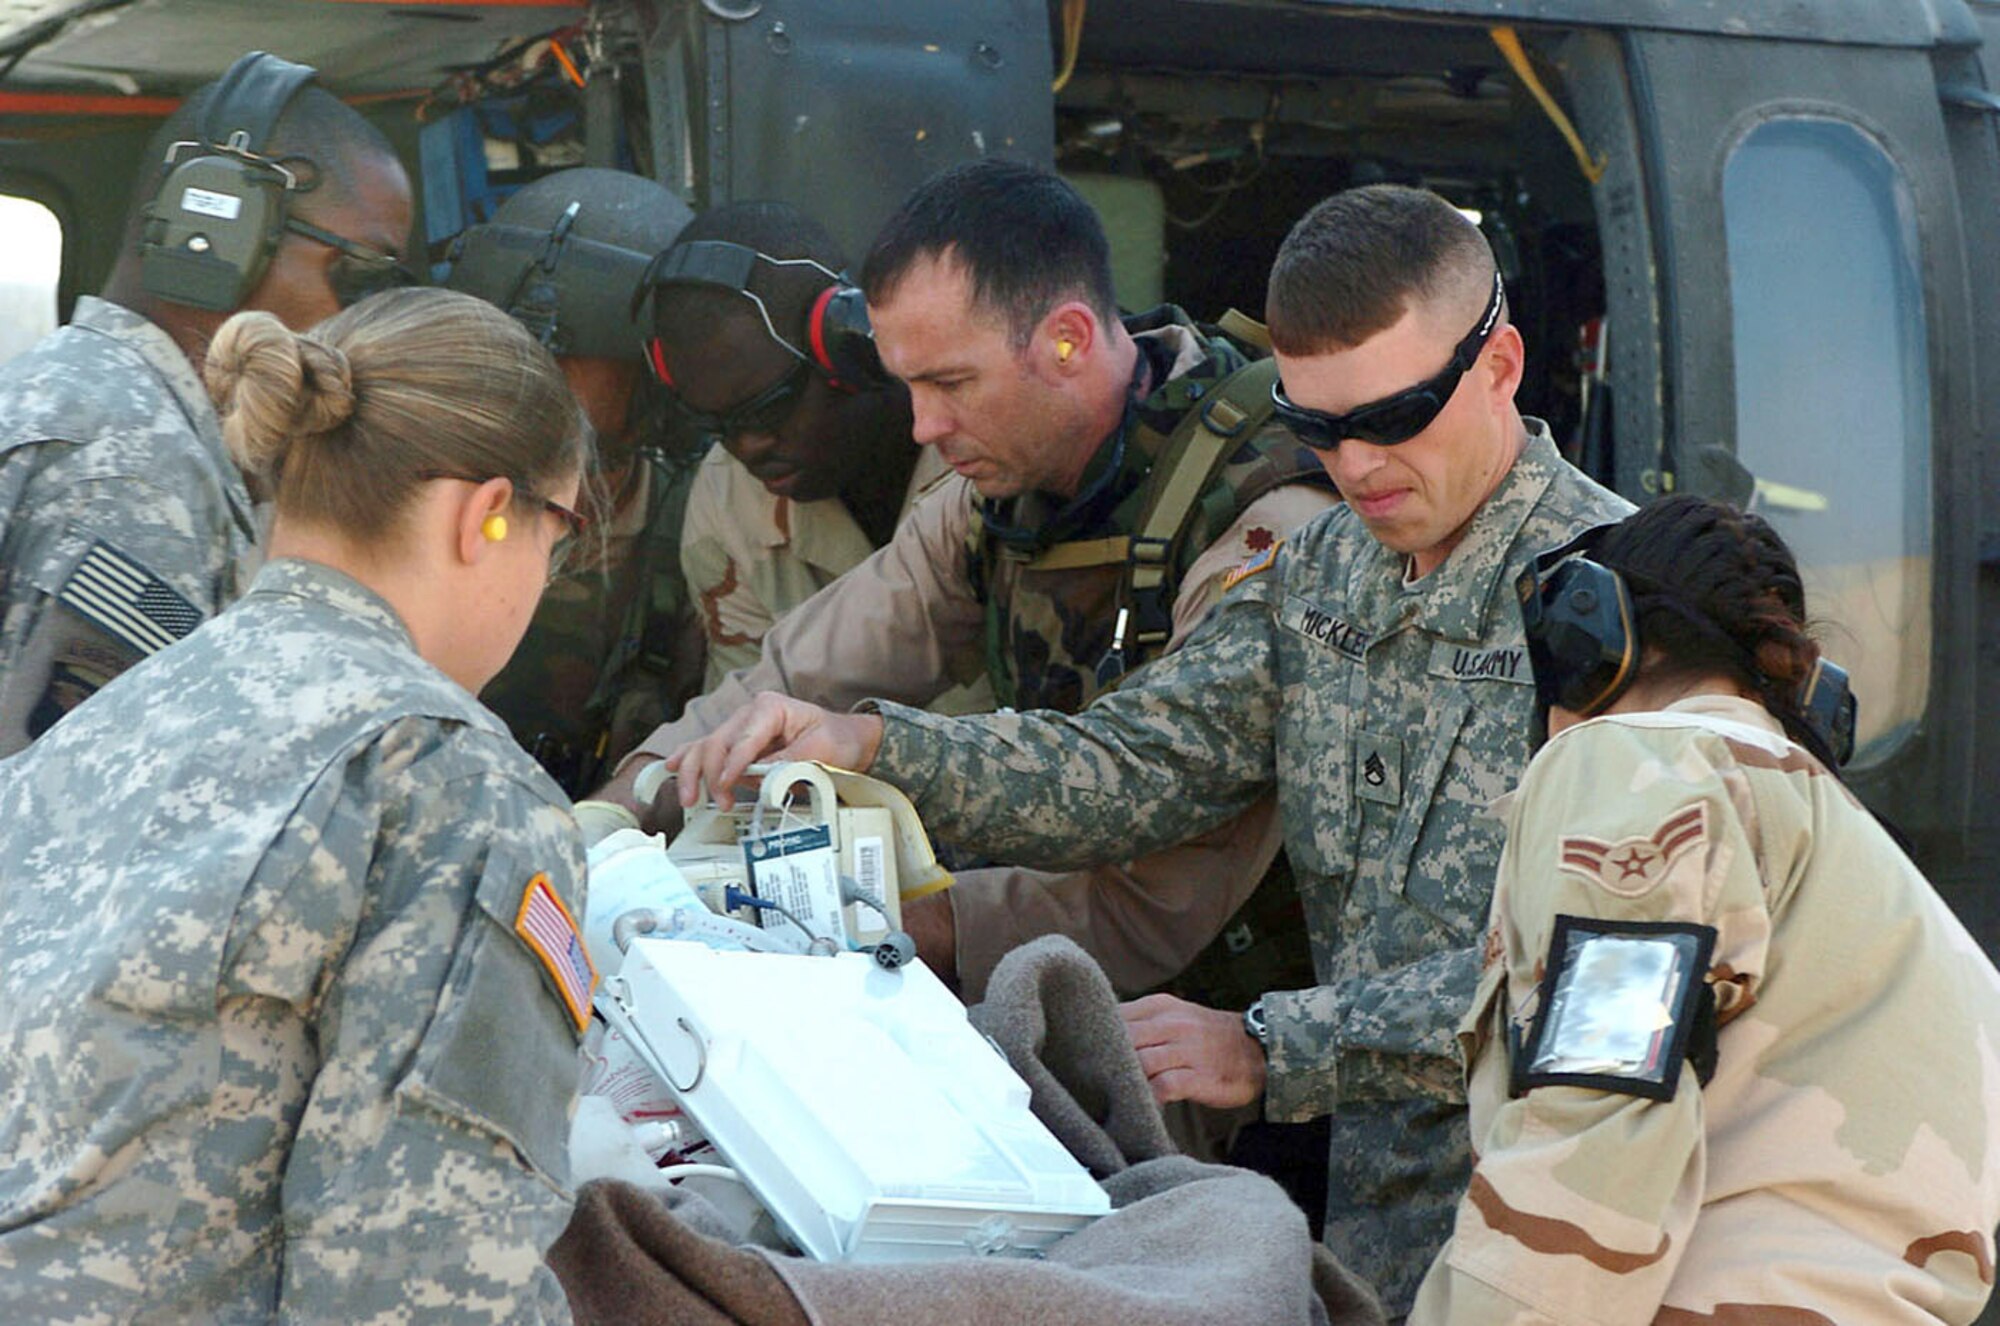 BALAD AIR BASE, Iraq (AFPN) -- Airmen and Soldiers unload a patient from a helicopter at the Air Force theater hospital here. Service members who are wounded in Iraq and need to be medically evacuated come to this hospital. (U.S. Army photo by Sgt. Dallas Walker)